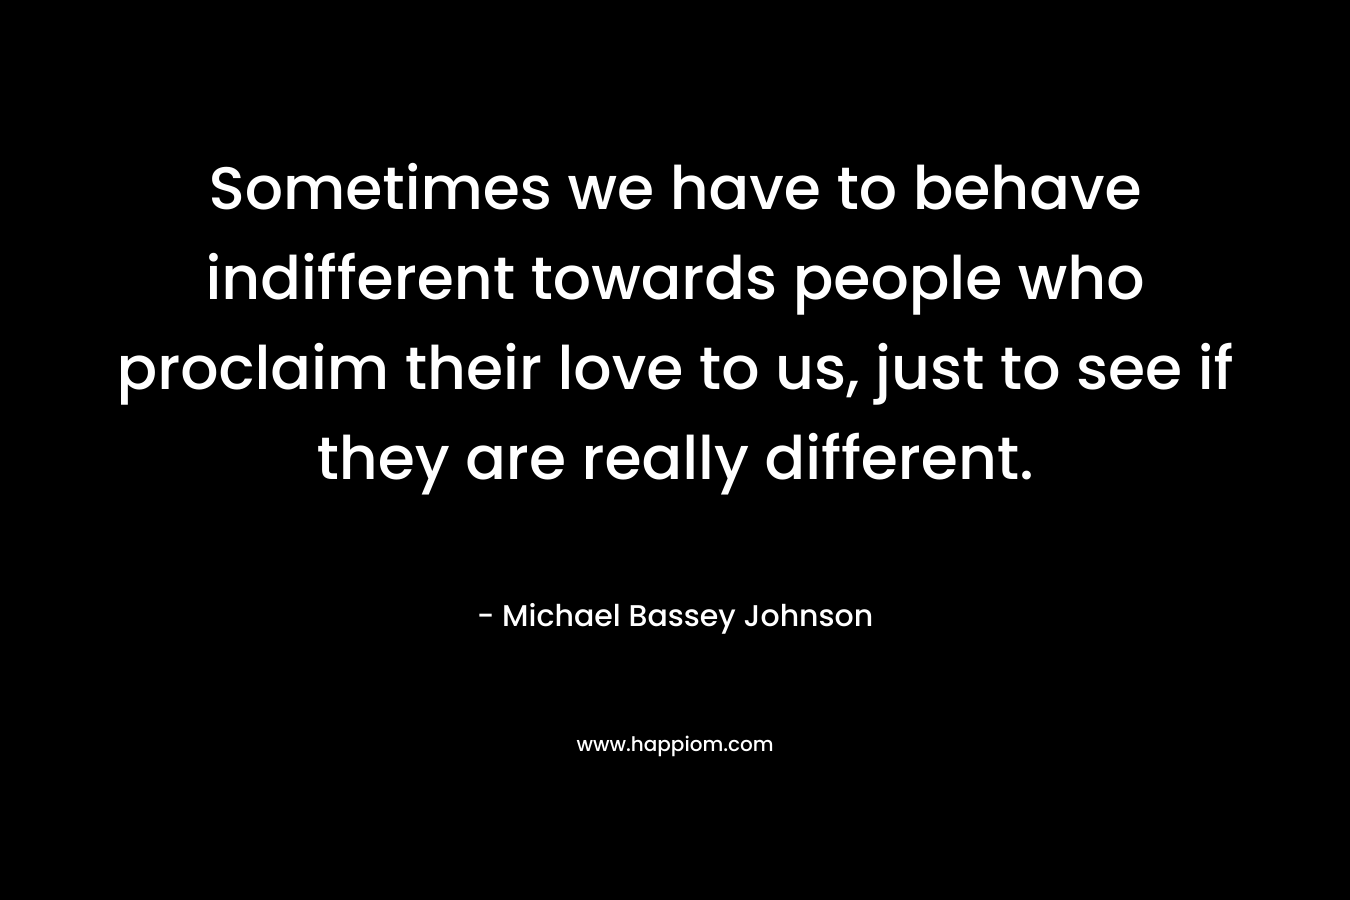 Sometimes we have to behave indifferent towards people who proclaim their love to us, just to see if they are really different. – Michael Bassey Johnson